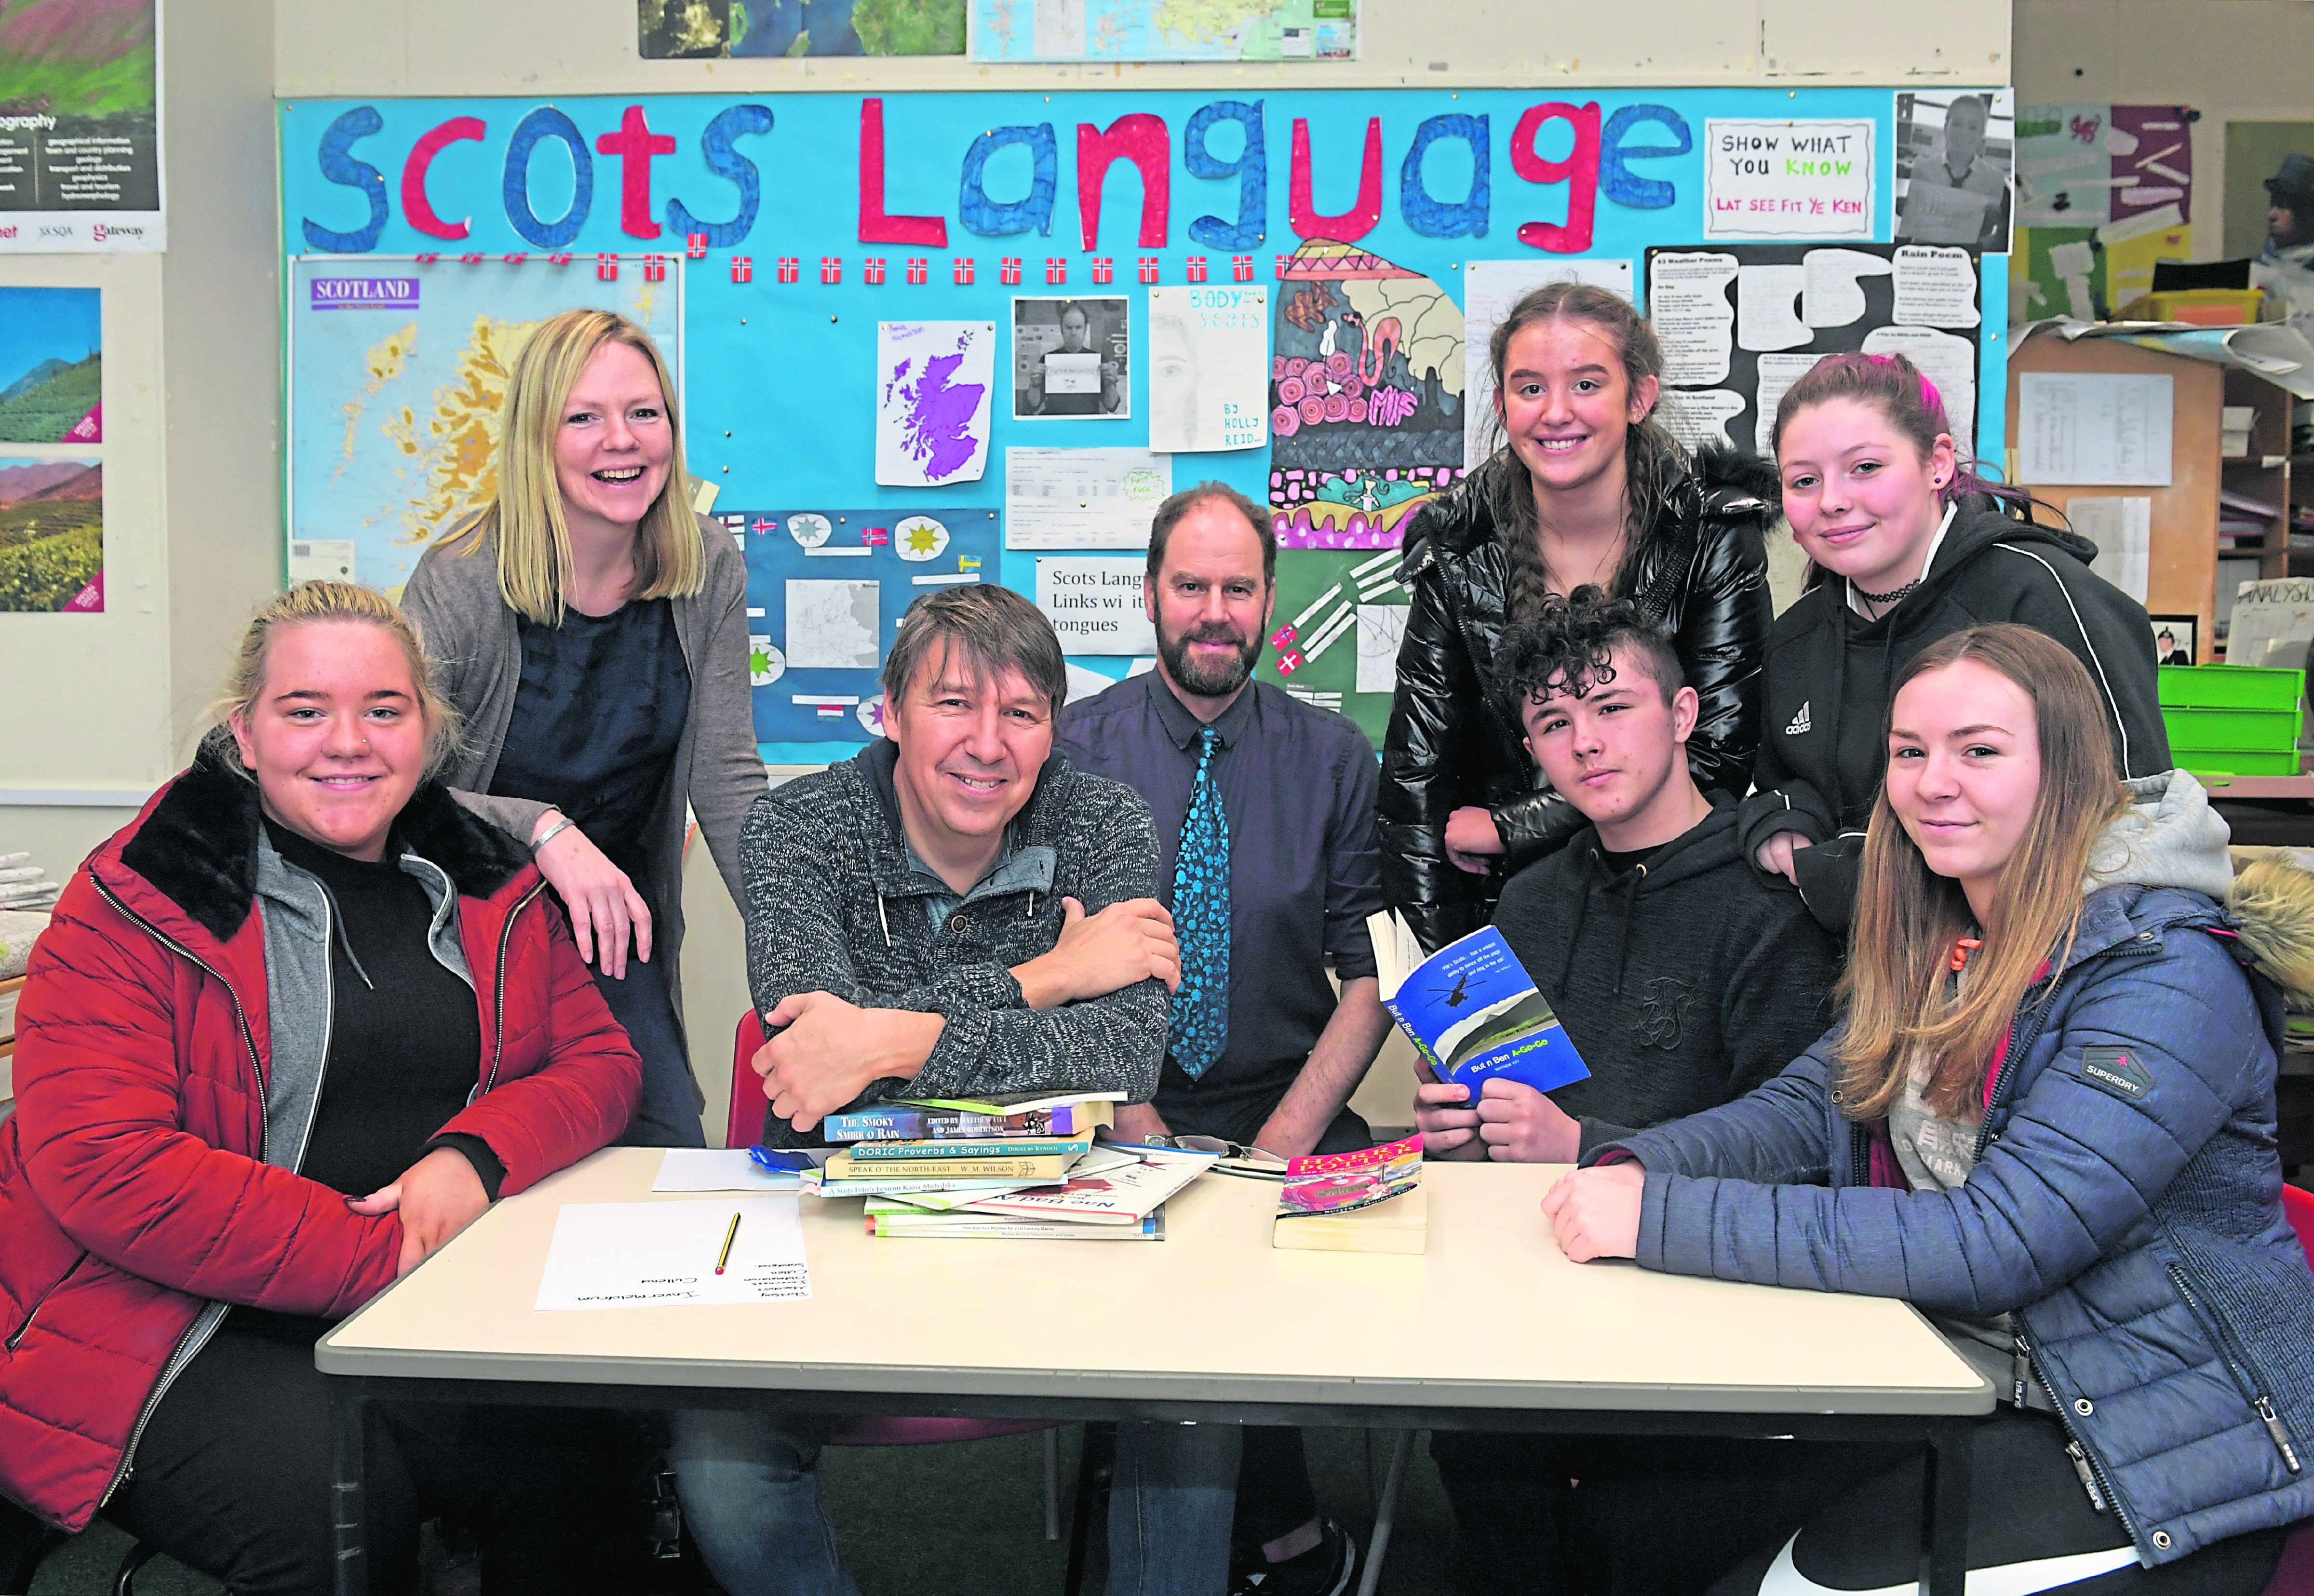 Banff Academy have teamed up with Aberdeen University to examine the benefits of studying towards the Scots Language Award. From left, Libby Wilson, the university's Claire Needler, poet and novelist Matthew Fitt, Humanities teacher Dr Jamie Fairbairn, Emma Twatt, Richie Duncan, Jaymi Sivewright and Ellie Narron.
Picture by Kath Flannery.